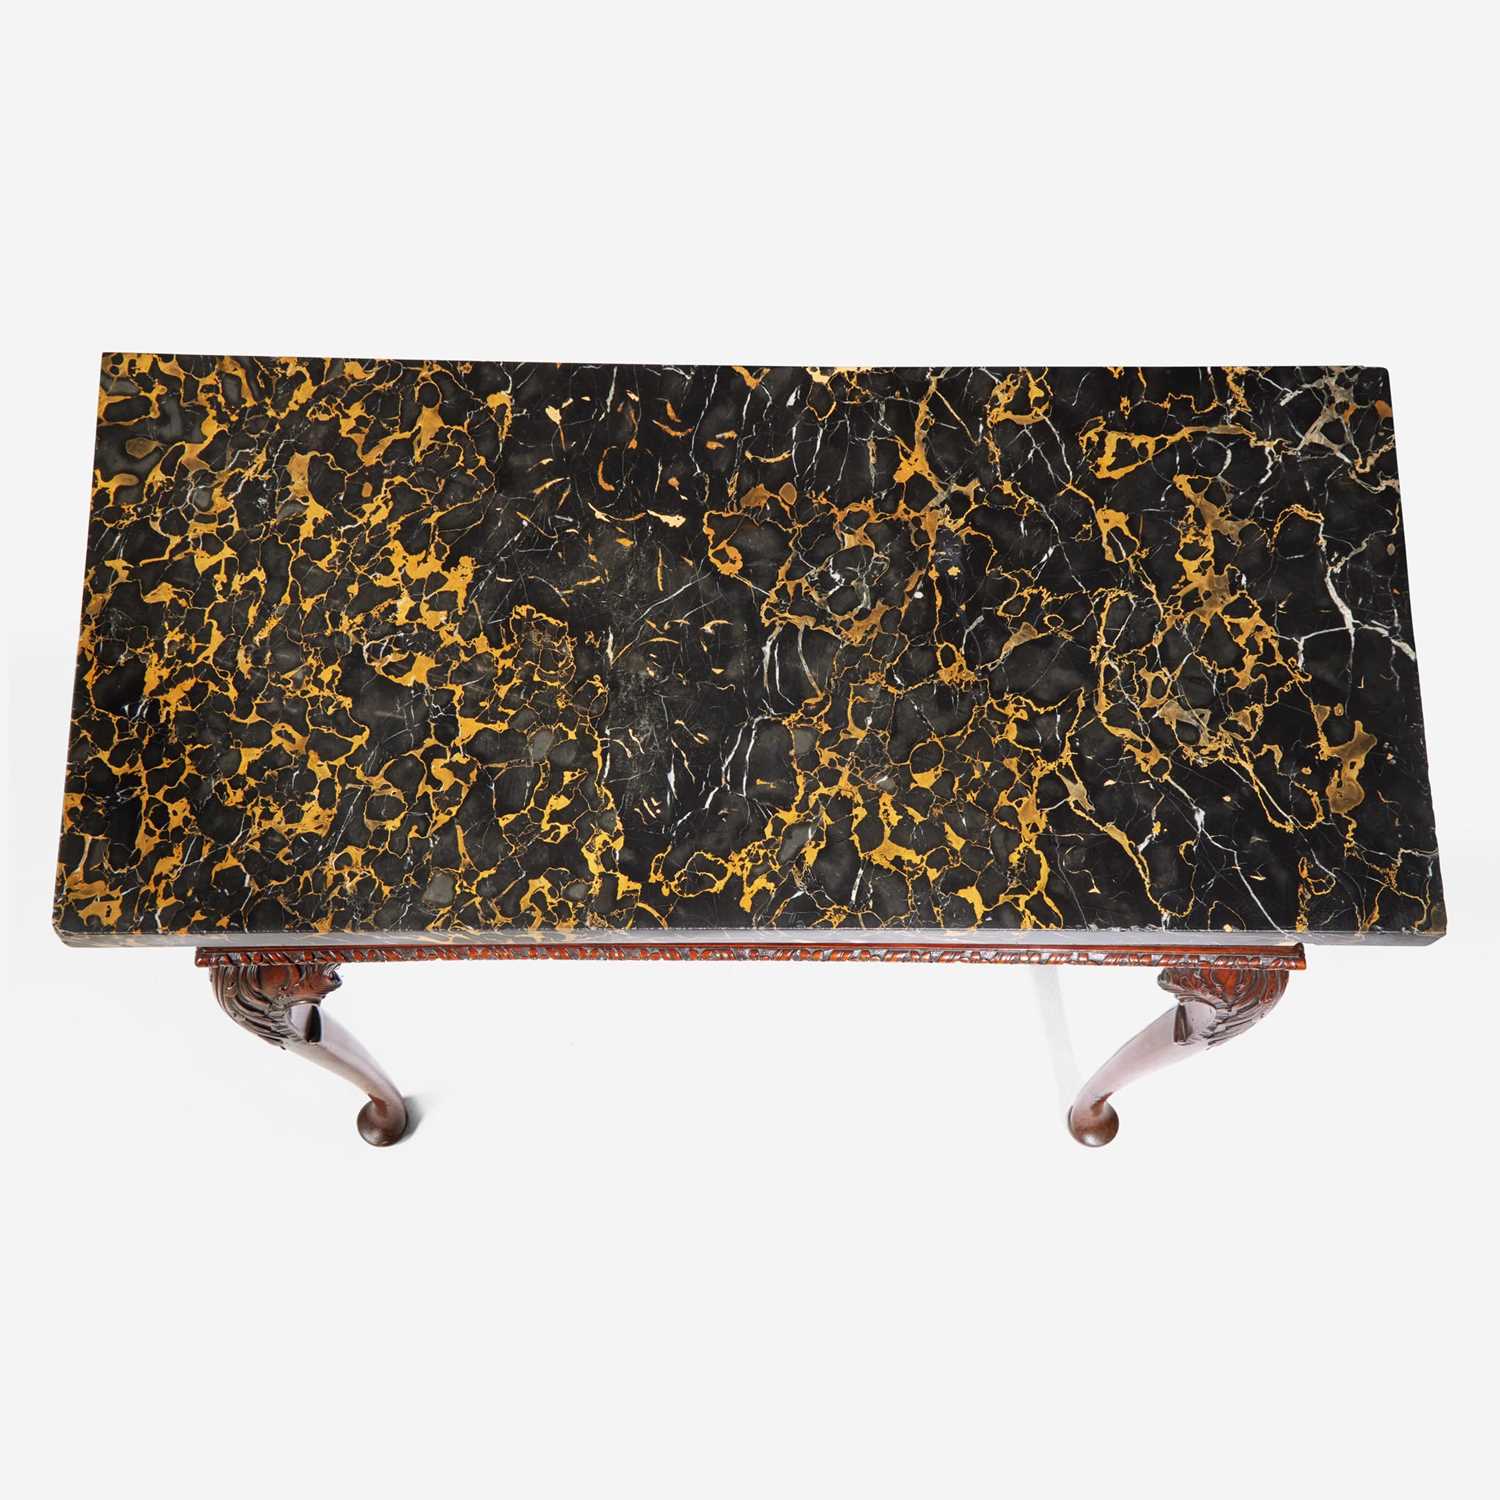 A George II rectangular carved walnut side table with Portoro marble top mid-18th century - Image 3 of 4